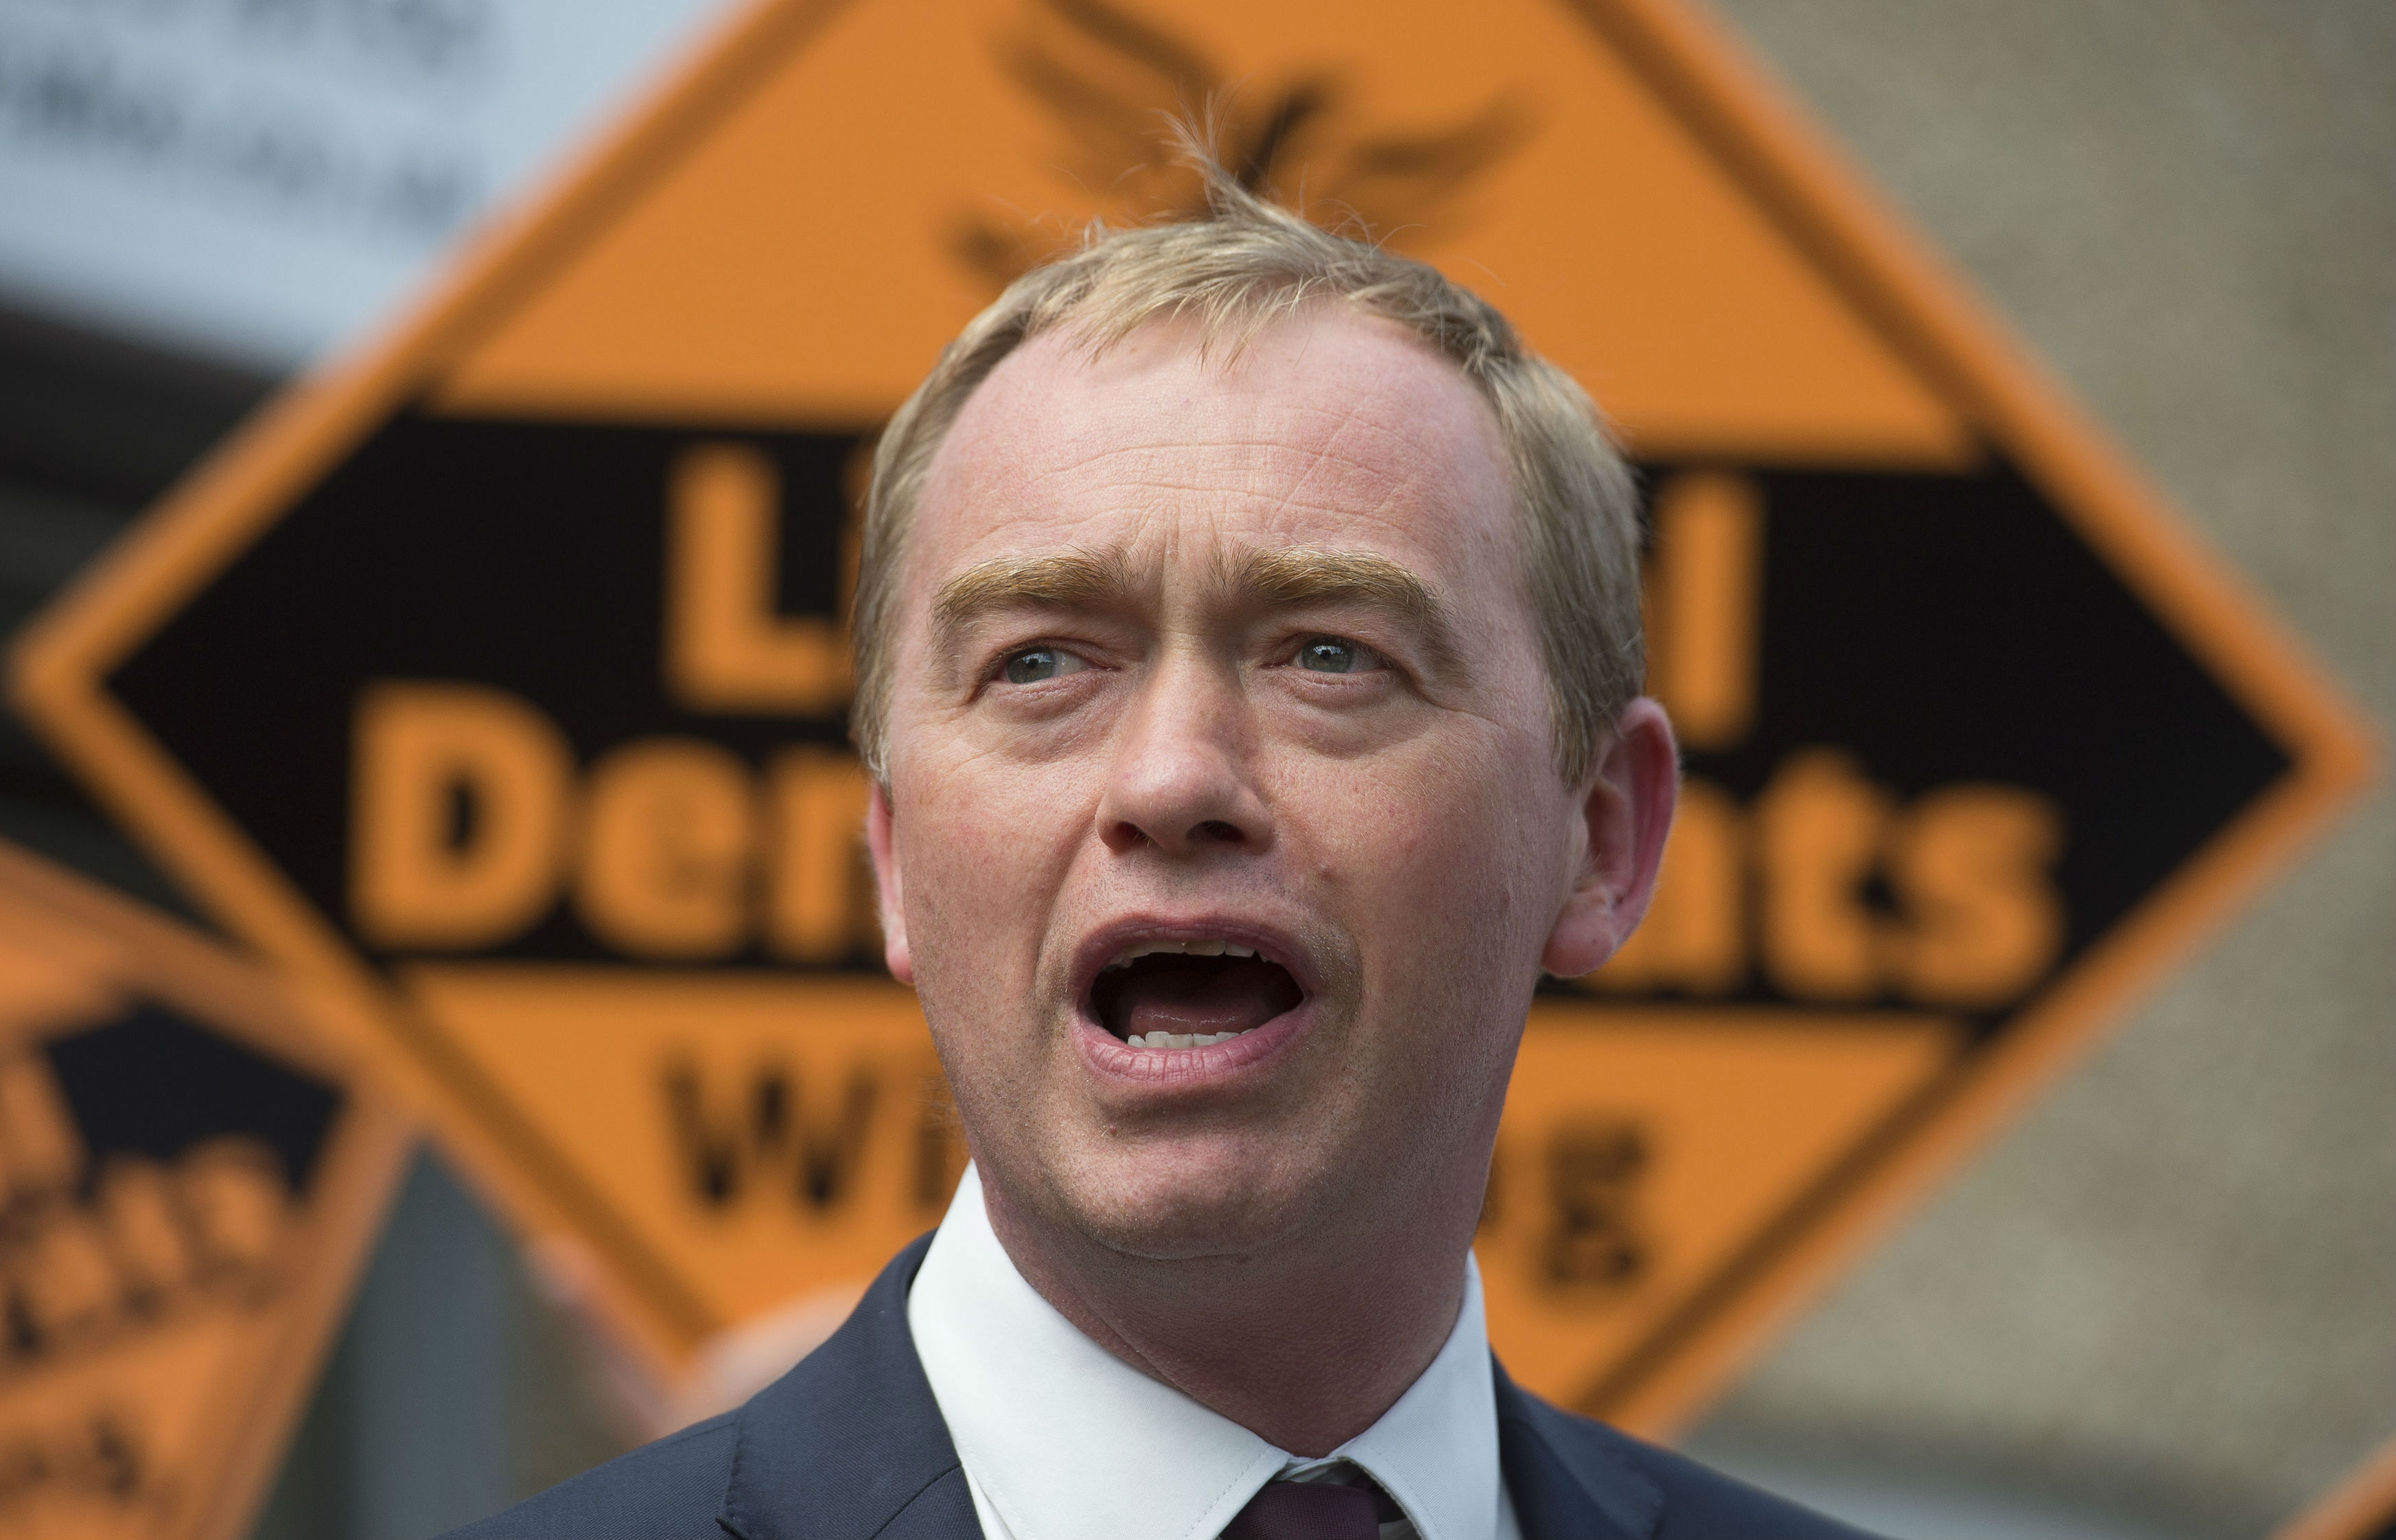 Tim Farron resigns saying it is 'impossible' to remain as Lib Dem party leader and be 'faithful to Christ' 